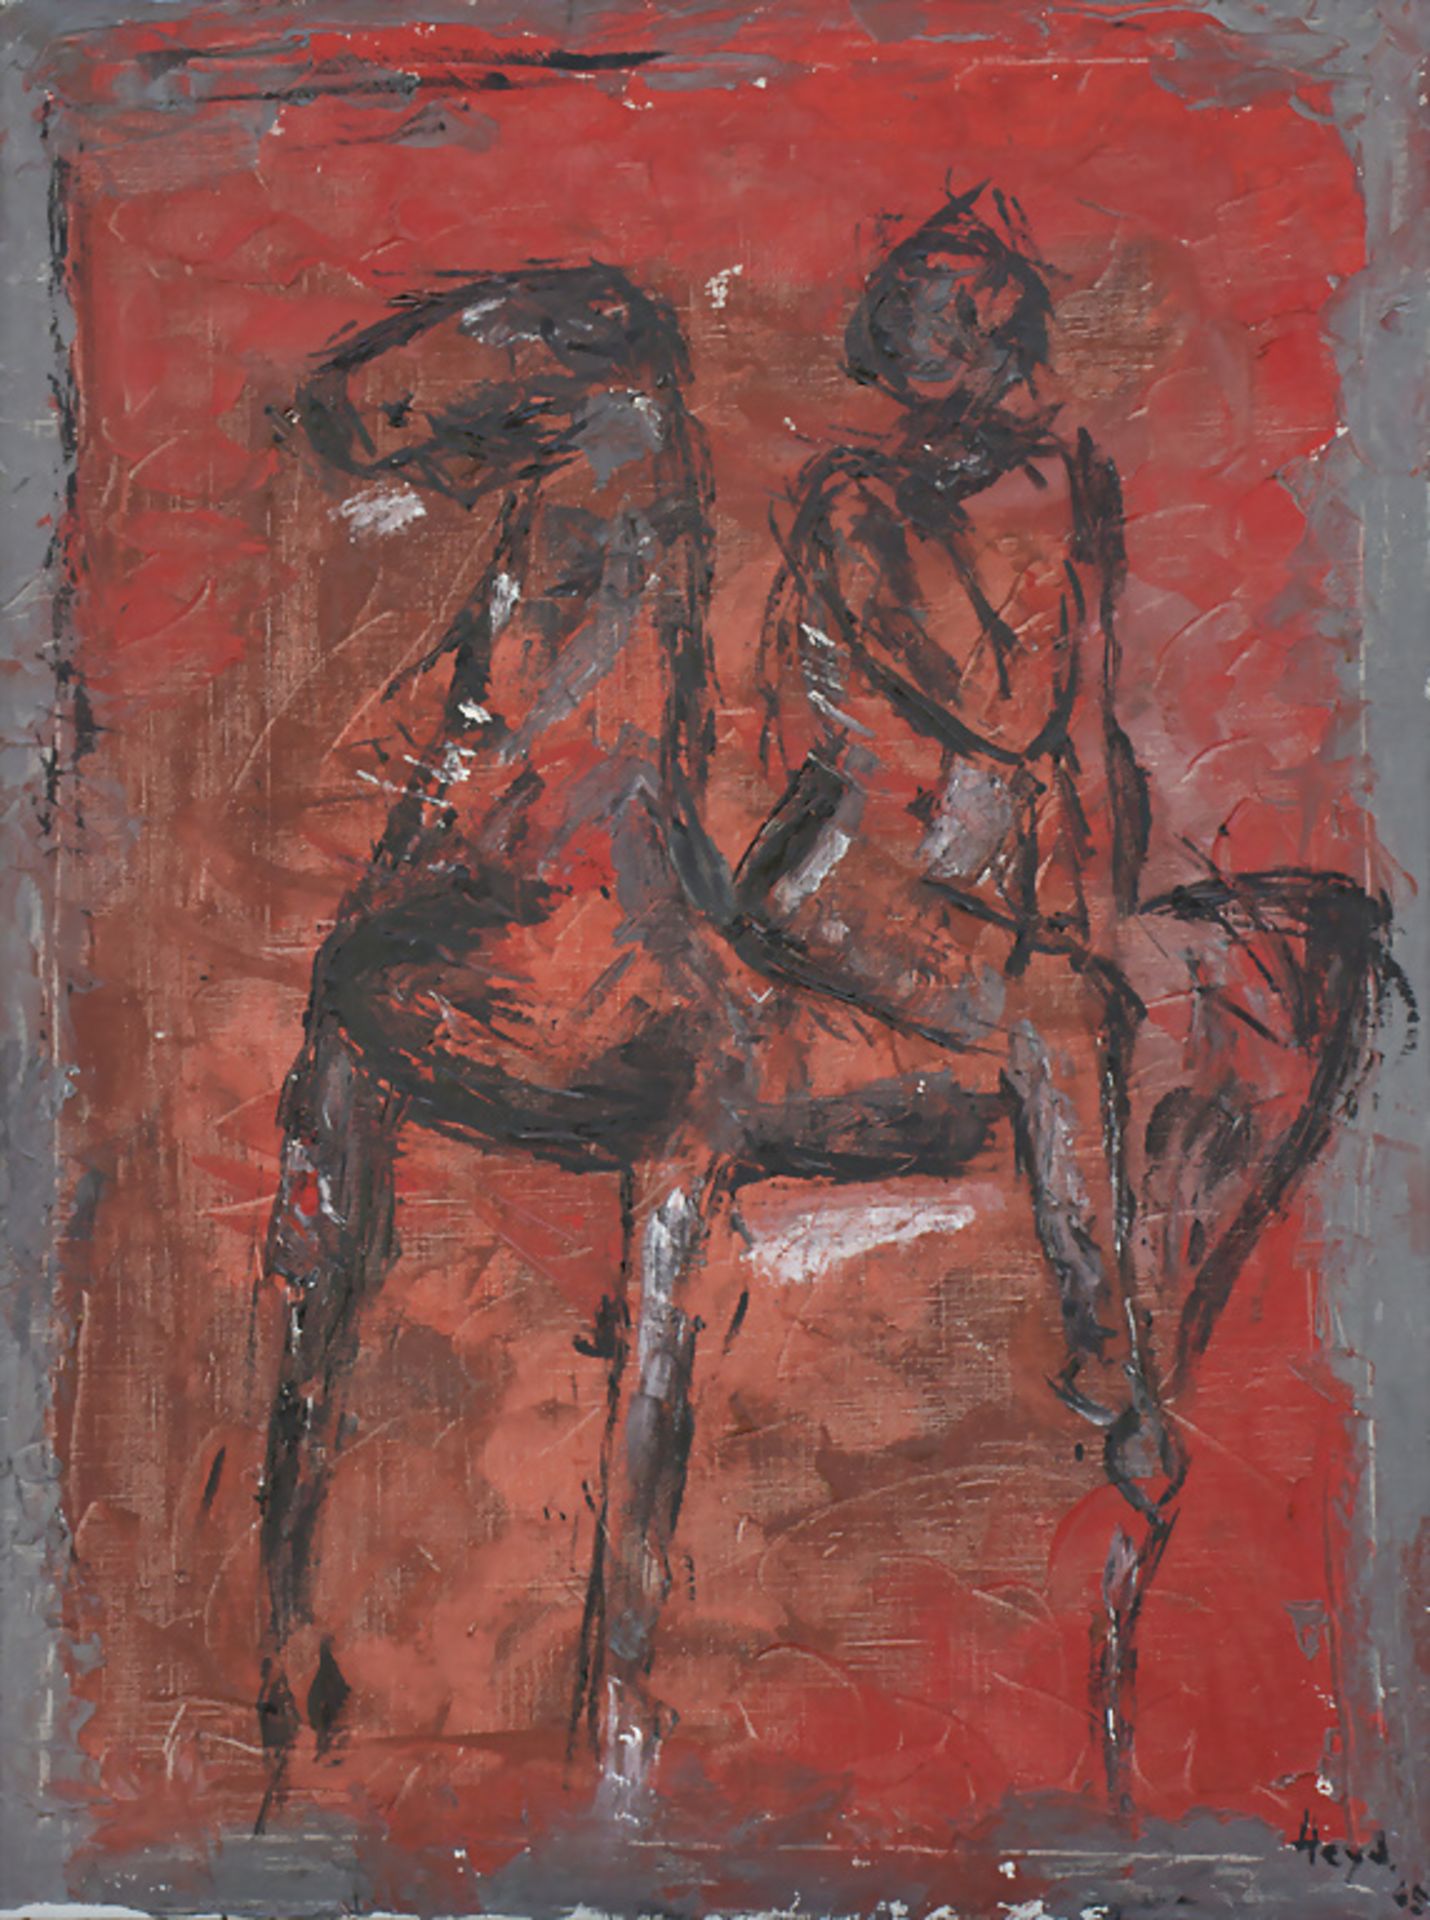 Eberhard Heyd, 'Roter Reiter' / 'Red rider', 1965 - Image 2 of 7